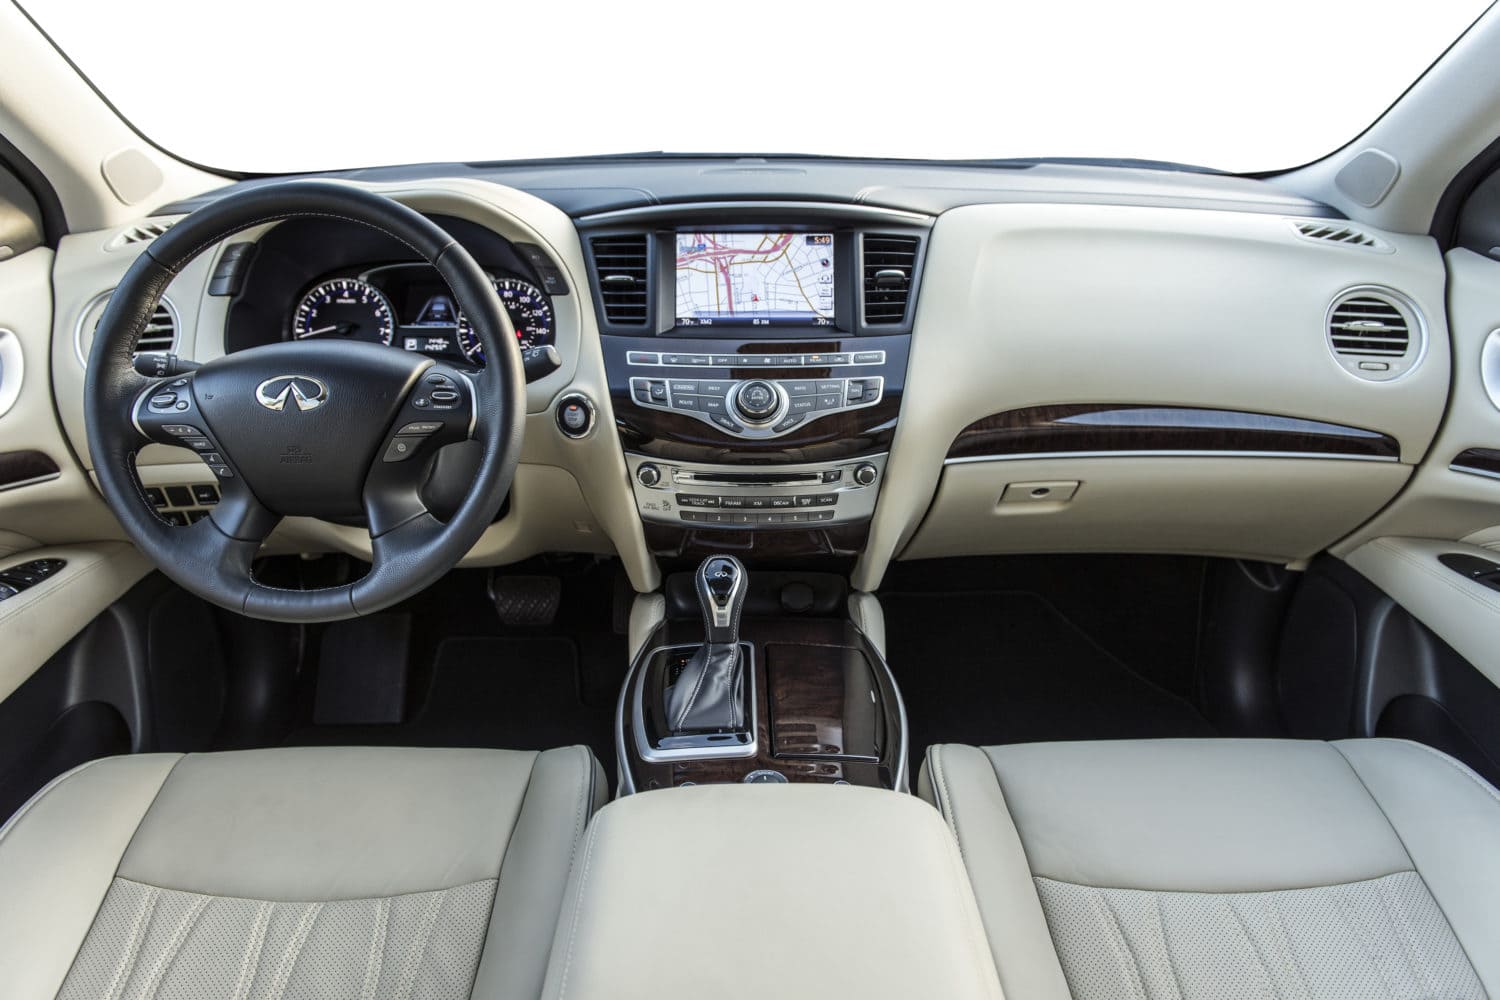 2016 Infiniti QX60 Crossover Gets Refreshed - Focus Daily News